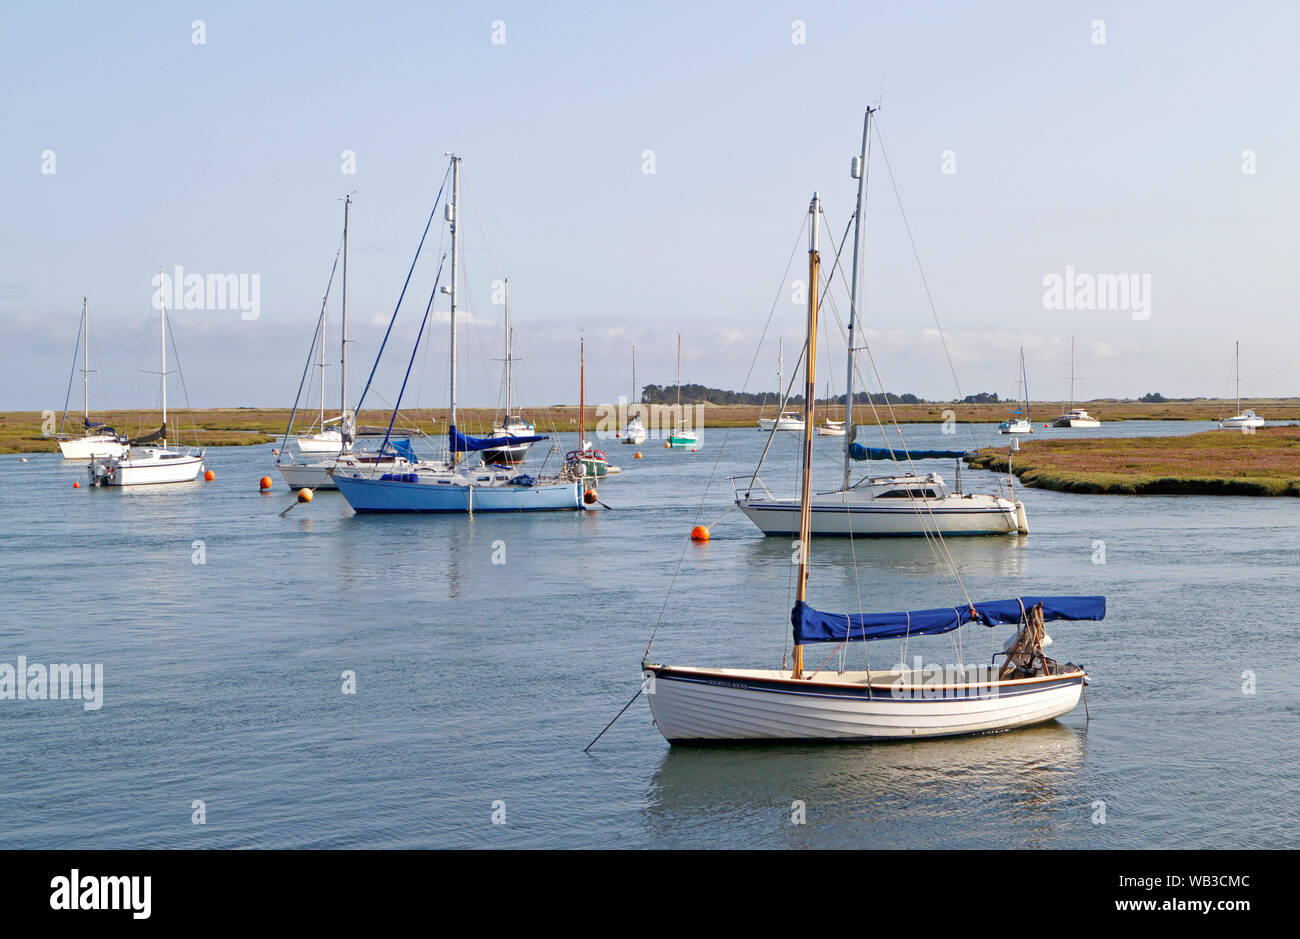 Dinghies, yachts, and sailboats, anchored in the east channel in the port of Wells-next-the-Sea, Norfolk, England, United Kingdom, Europe. Stock Photo